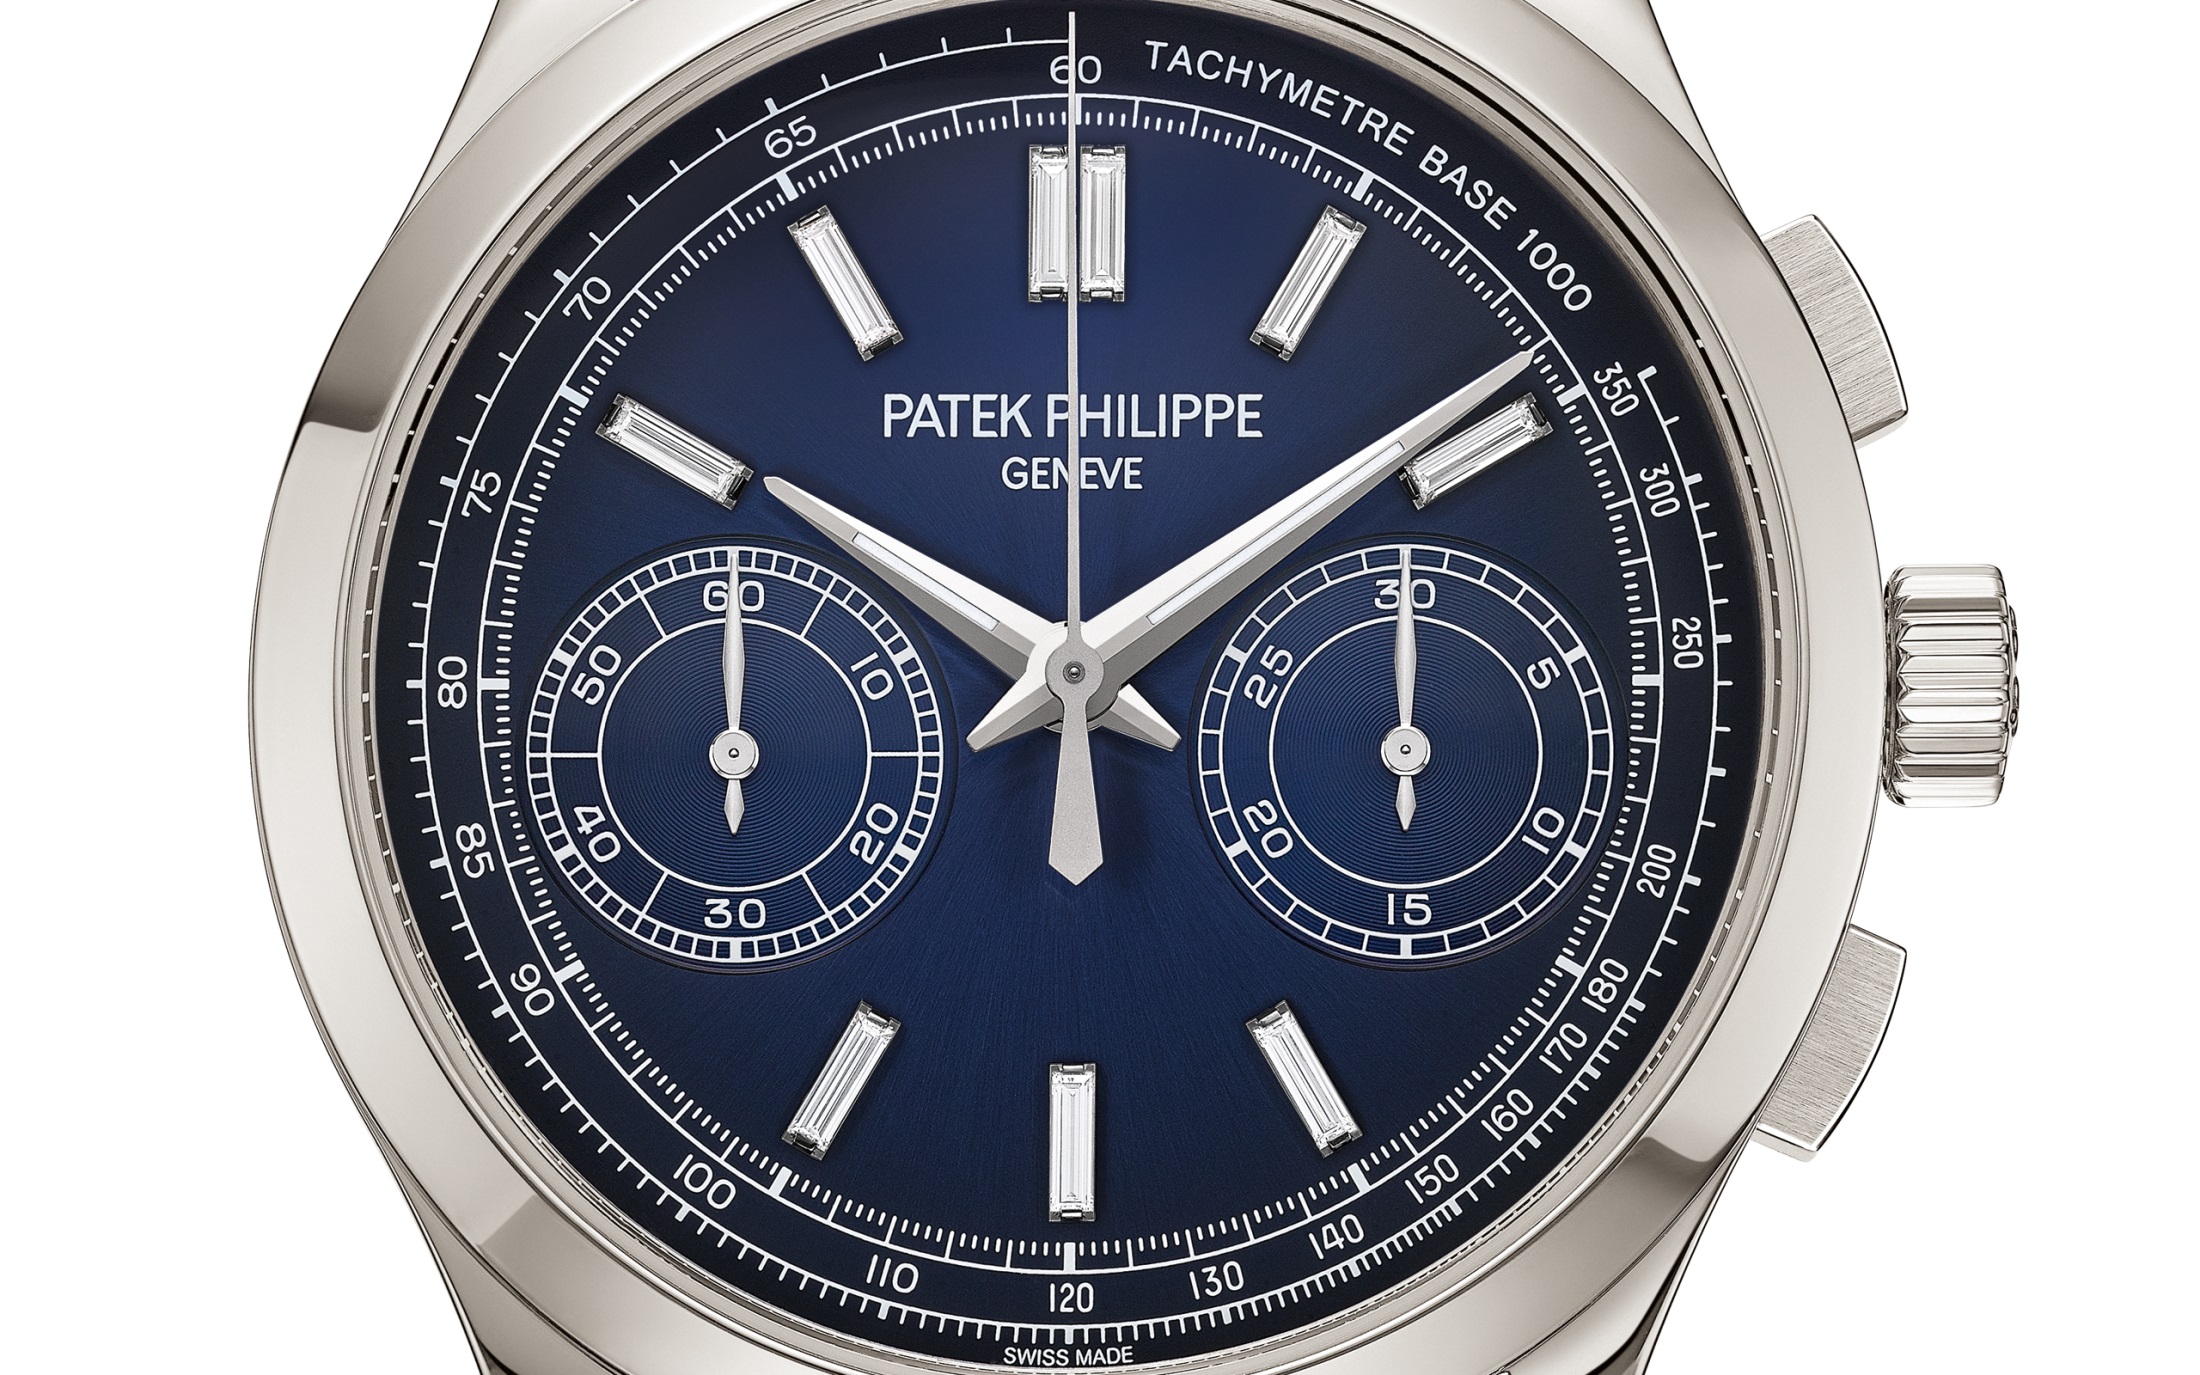 Patek Philippe 5054 G 001 Complications Officer’s Case Power Reserve Moonphase 18k White Gold